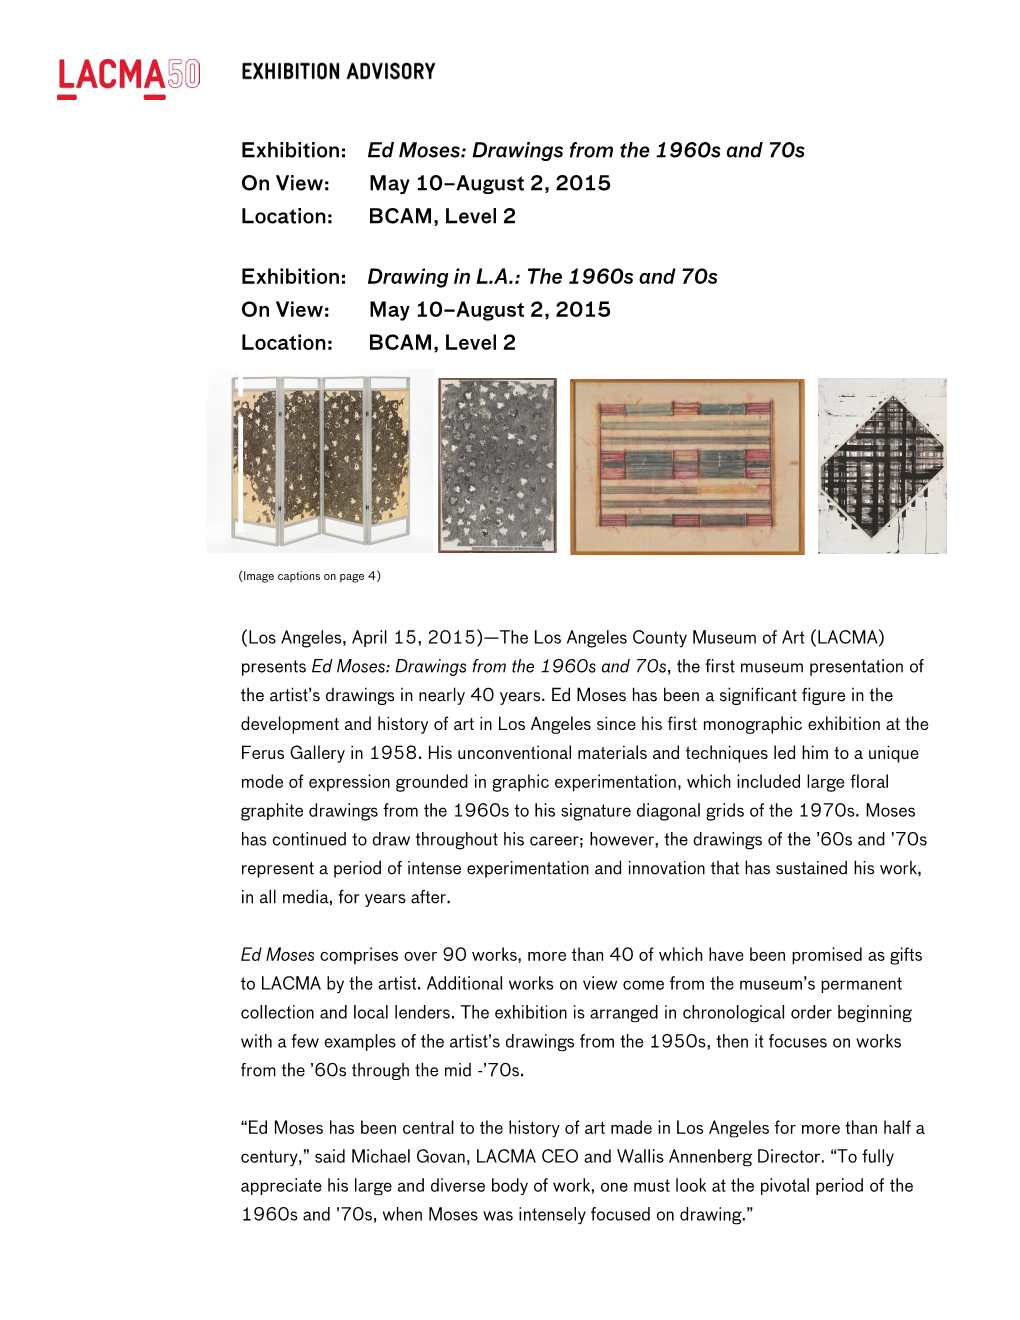 Ed Moses: Drawings from the 1960S and 70S on View: May 10–August 2, 2015 Location: BCAM, Level 2